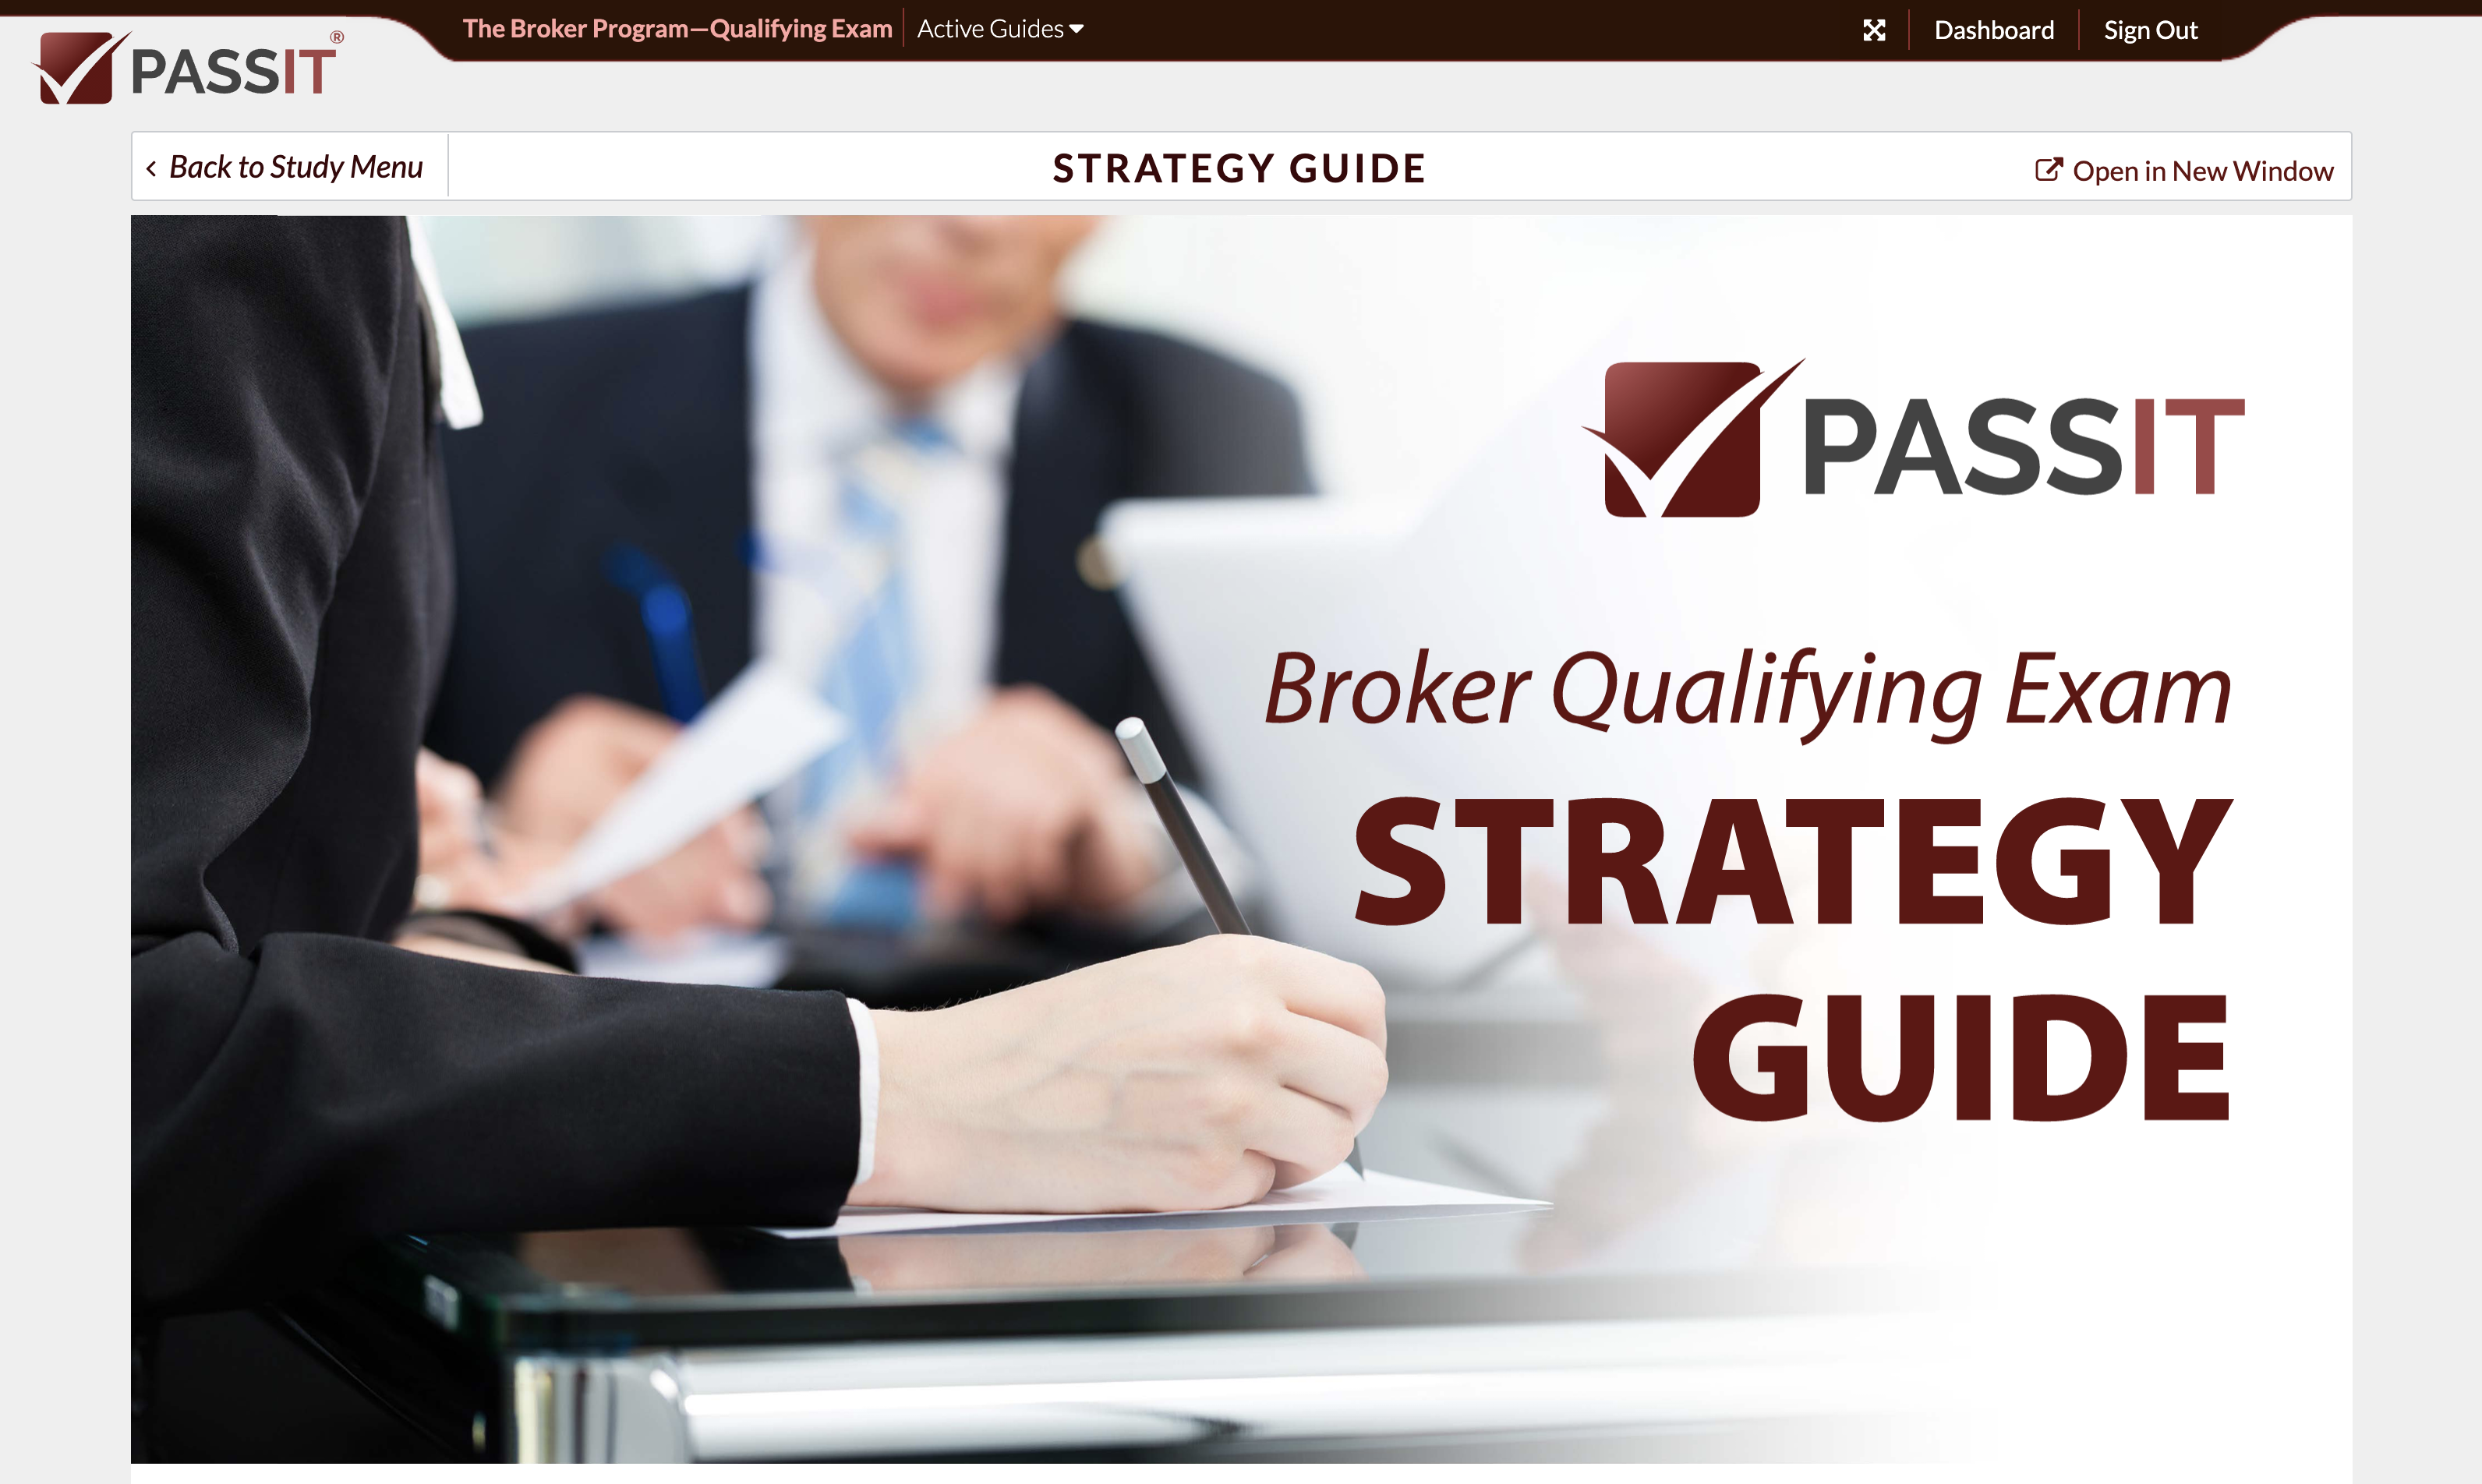 Broker Qualifying Exam Strategy Guide